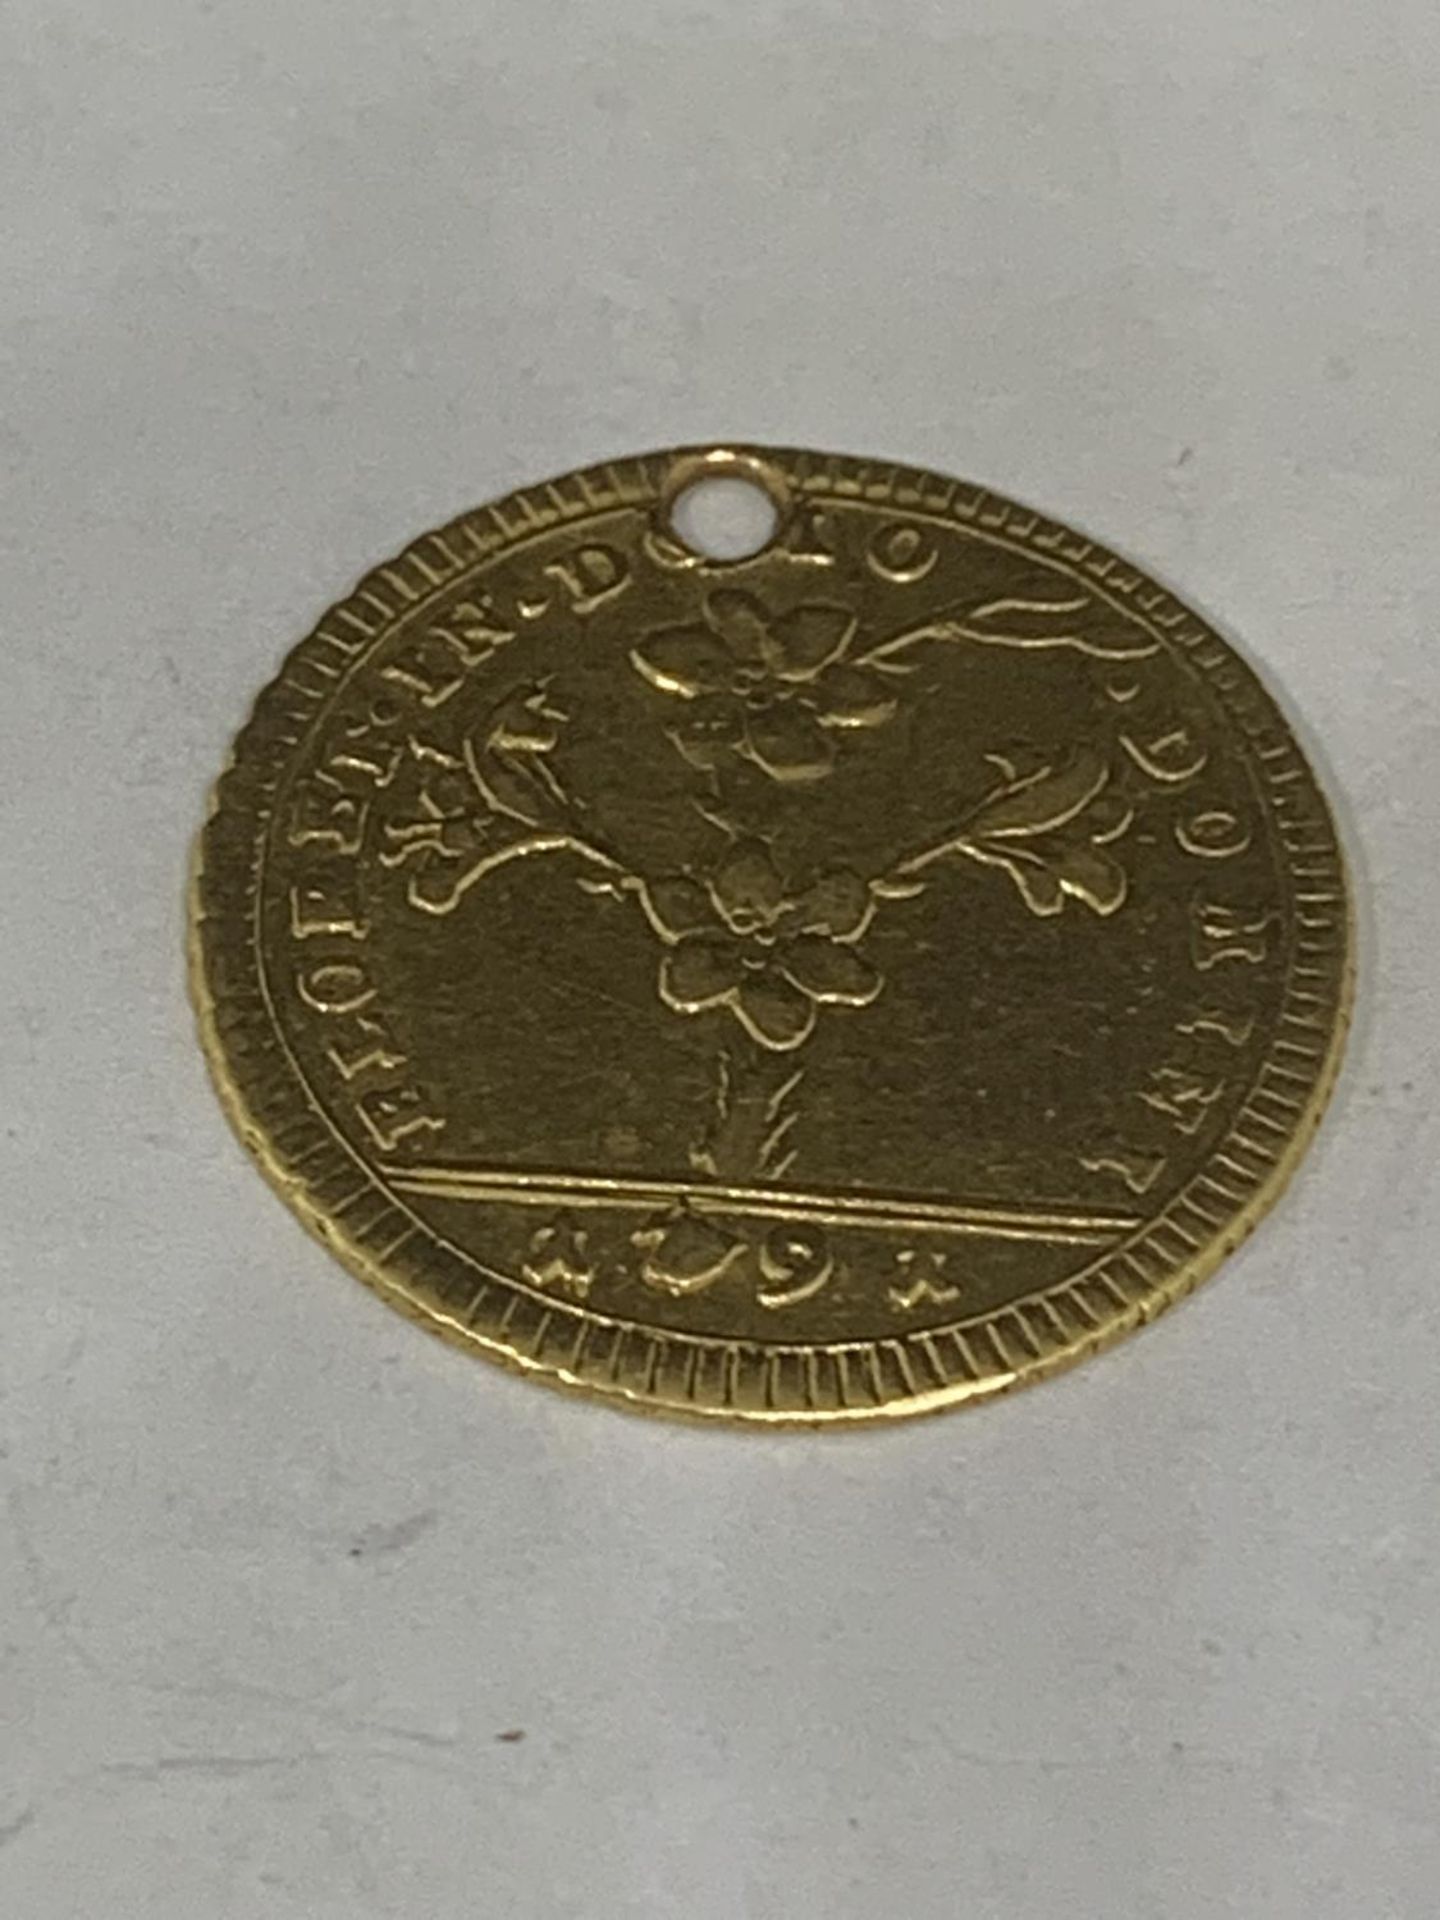 A 22 CARAT GOLD ONE DOPPIA 1791 COIN (DRILLED) GROSS WEIGHT 5.2 GRAMS